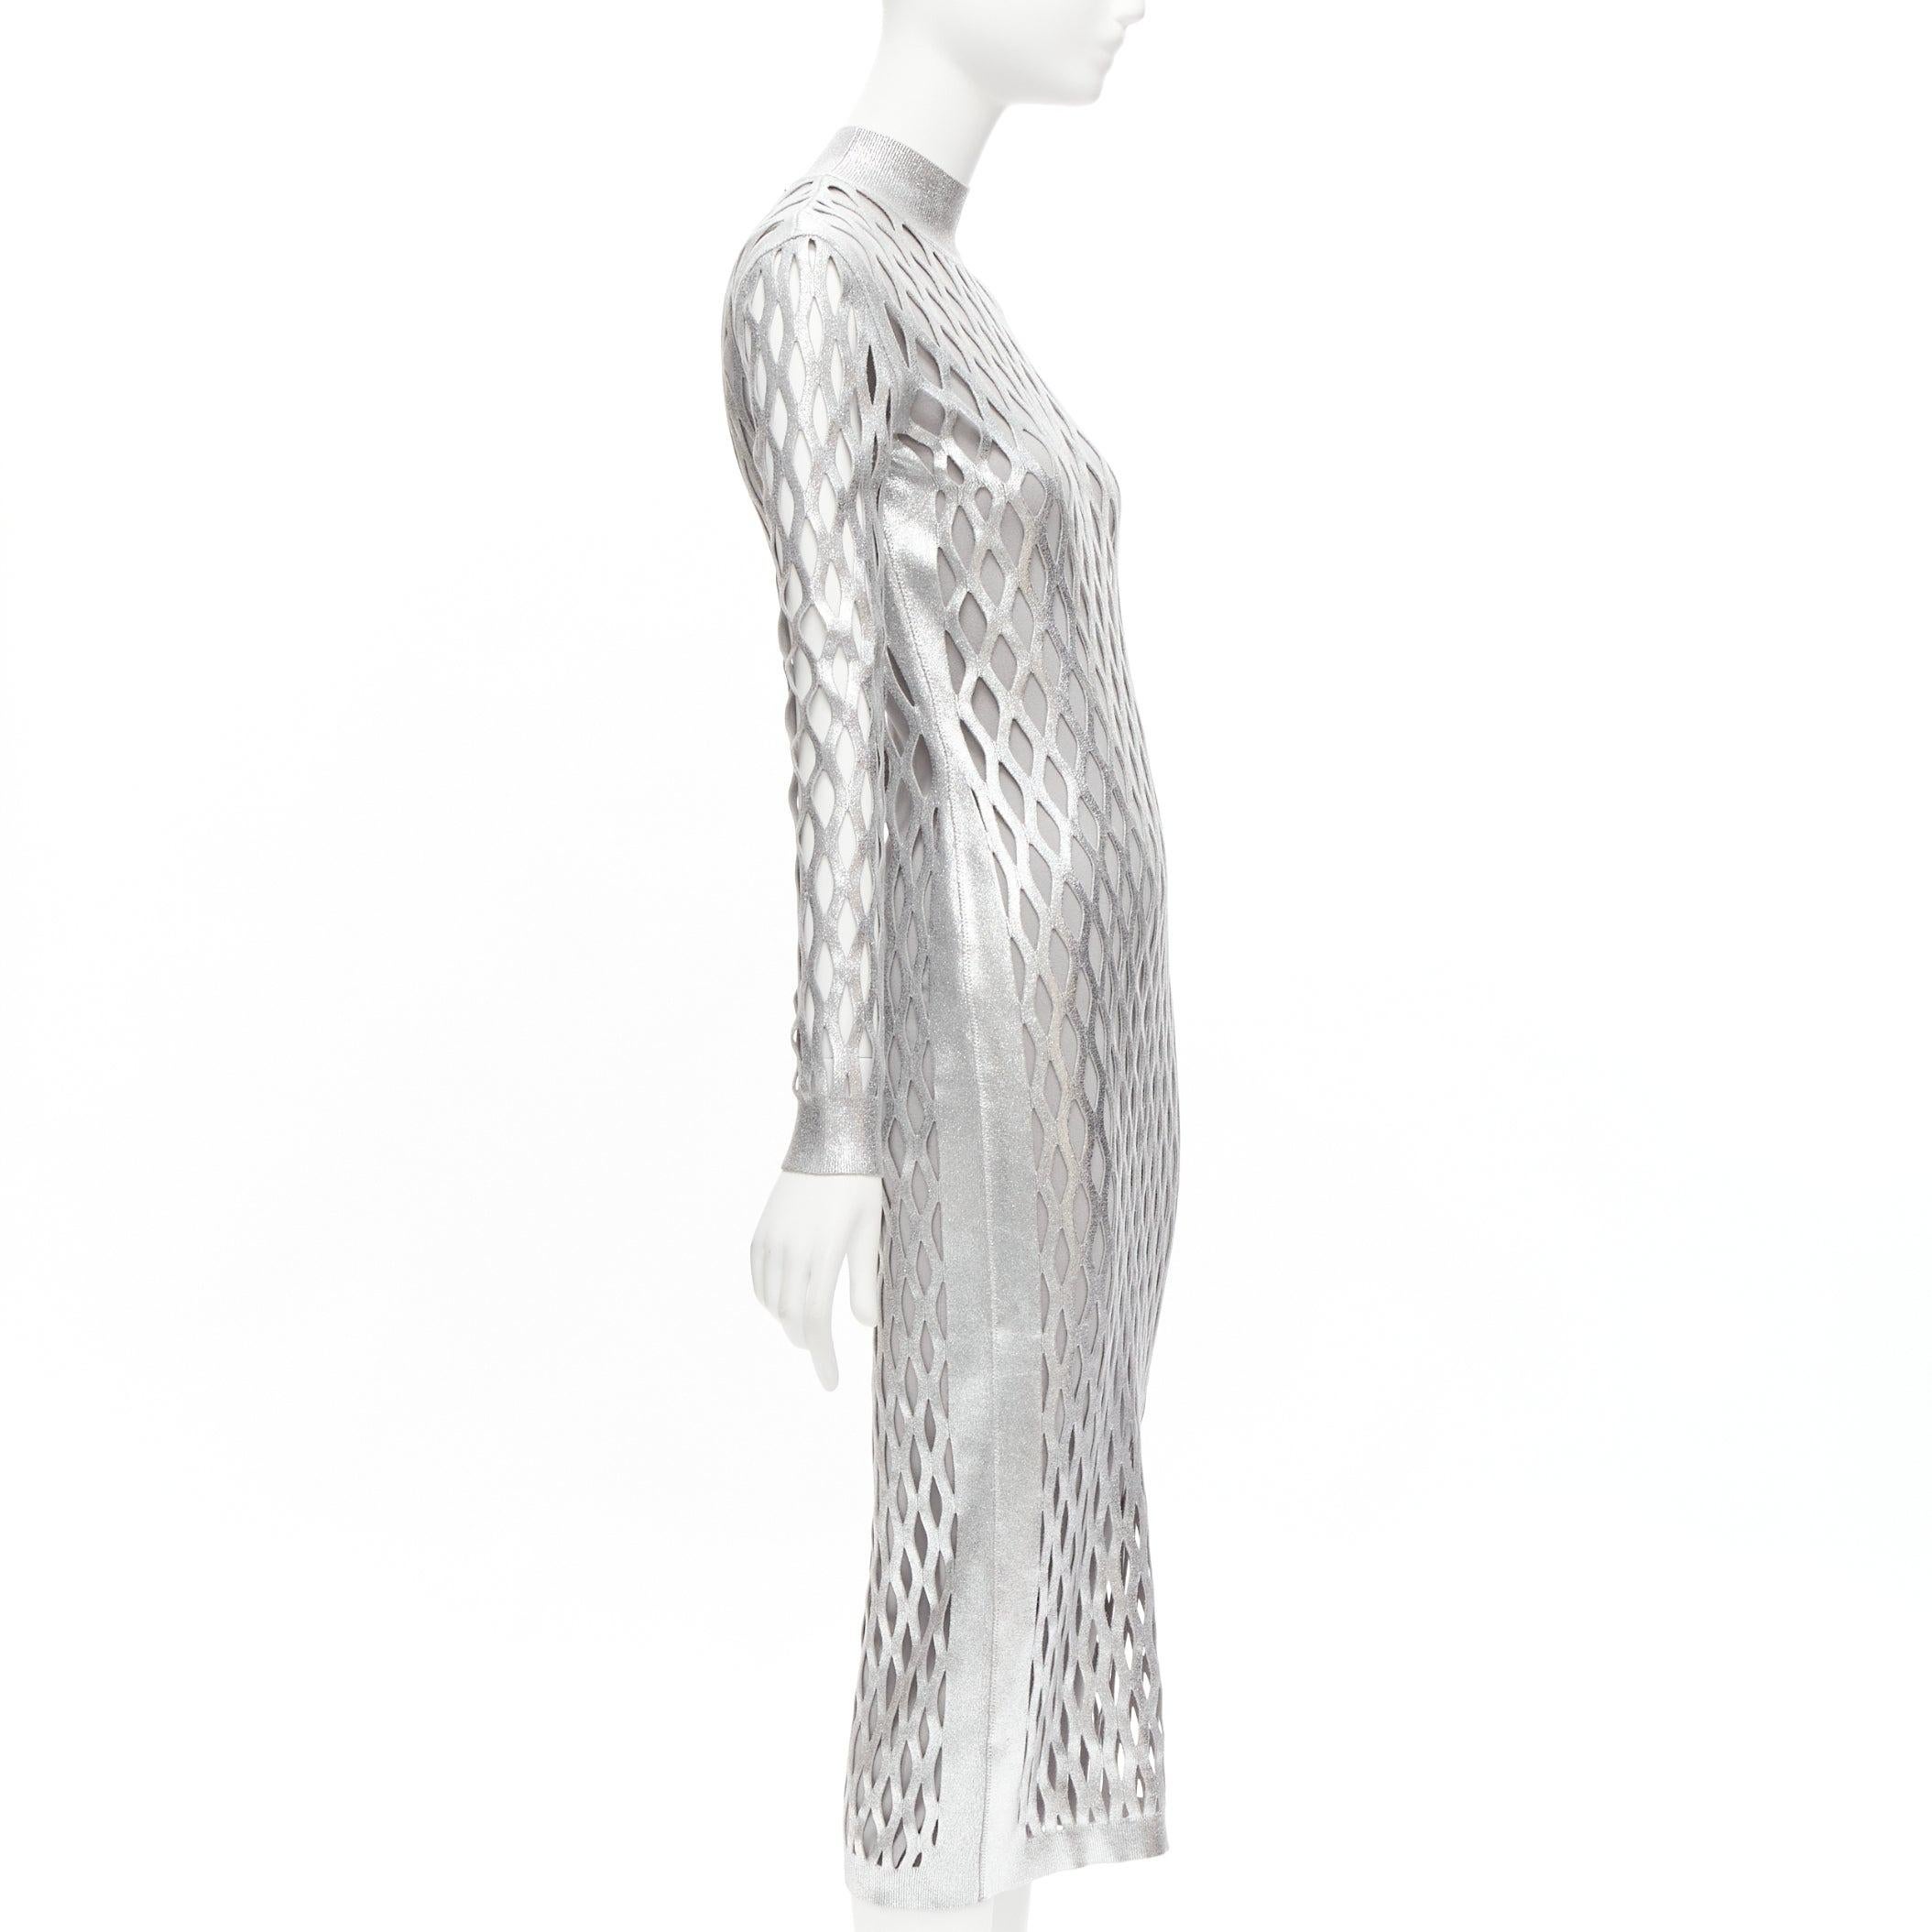 new FENDI Nicki Minaj 2019 Runway Abito silver net cut out lined dress IT42 M In New Condition For Sale In Hong Kong, NT